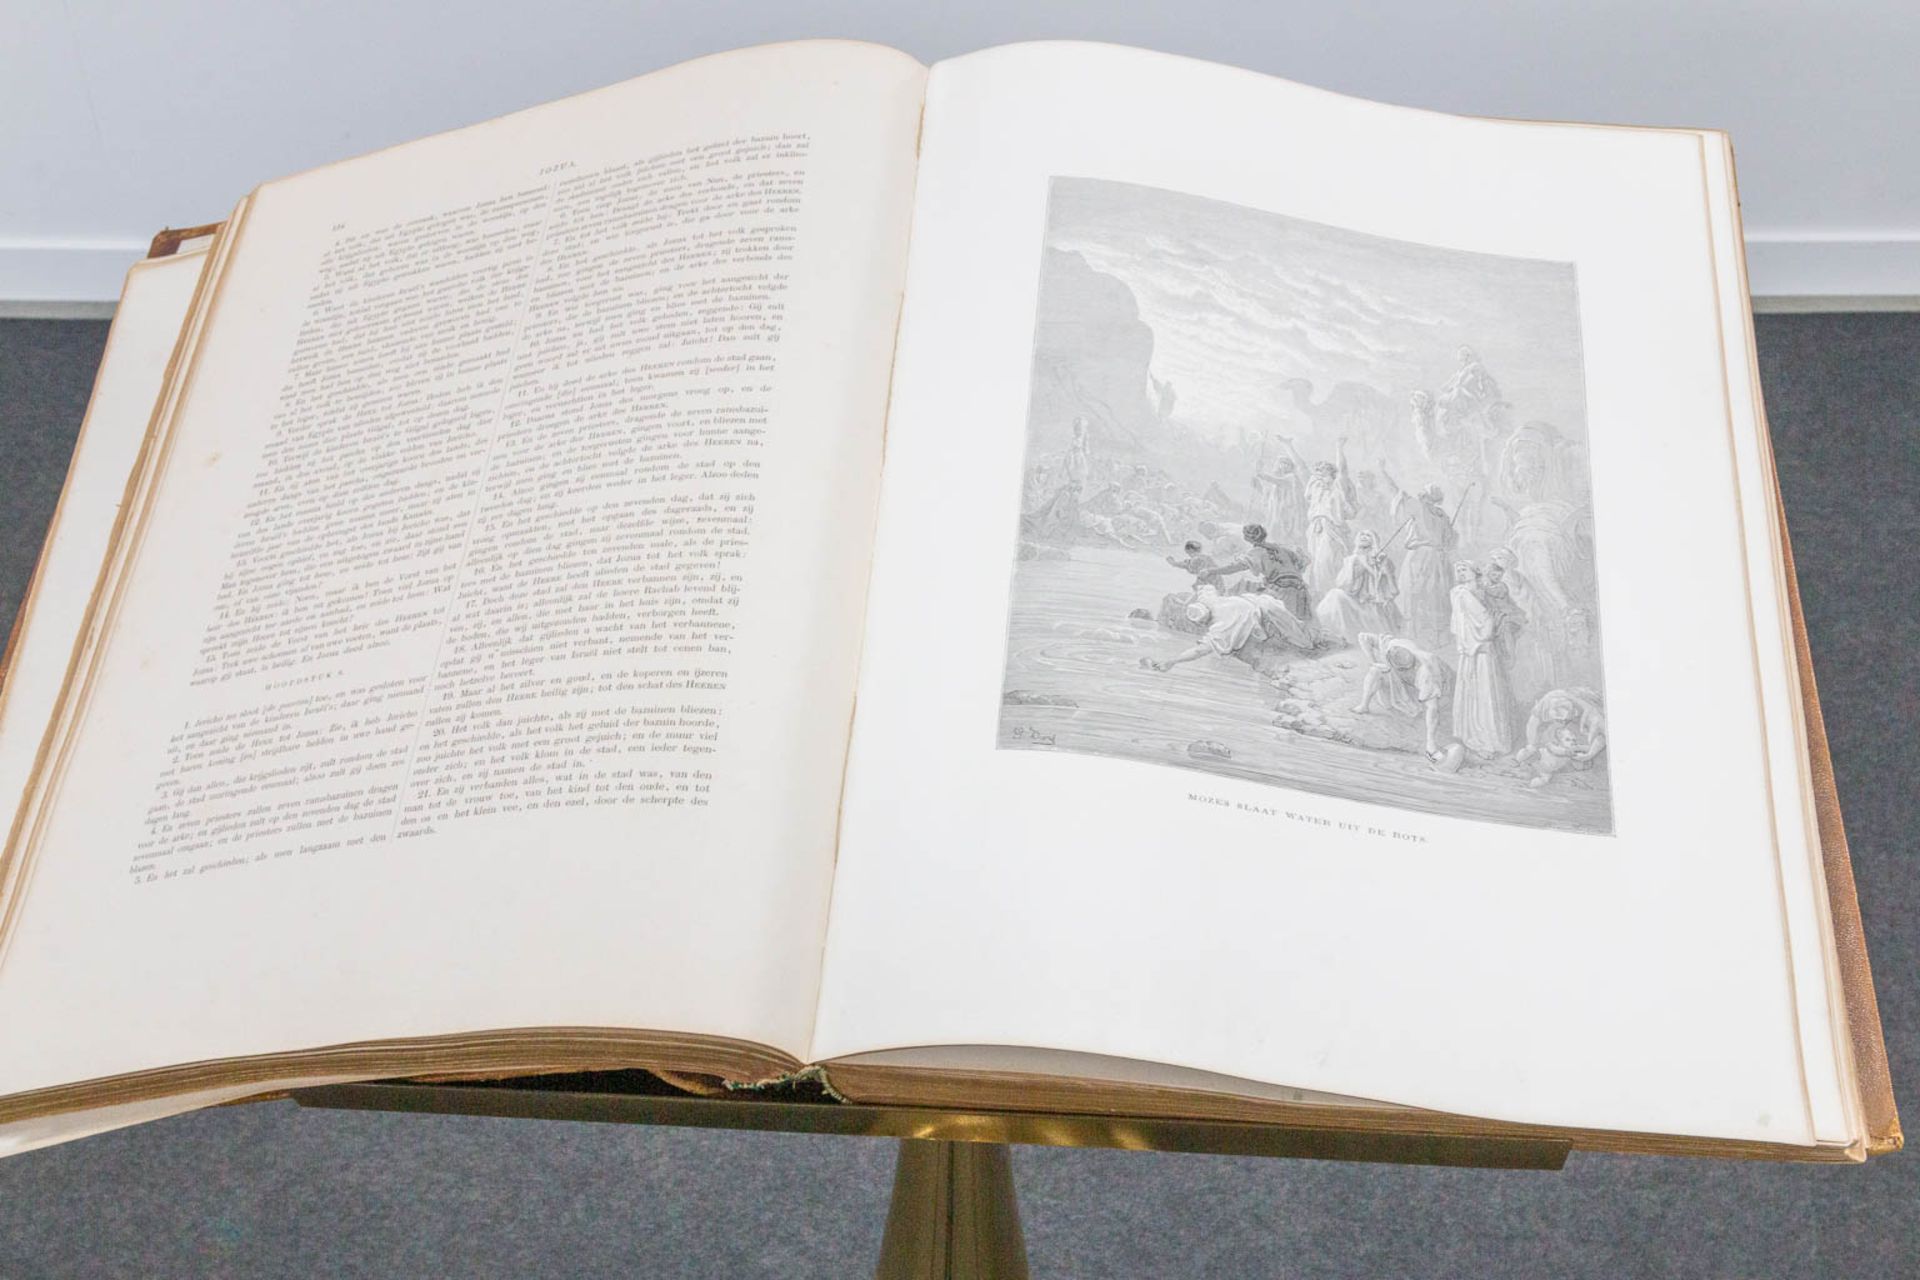 A pair of bibles 'The holy writing', the old and new testament, with 200 images by Gustave Doré. - Image 13 of 15